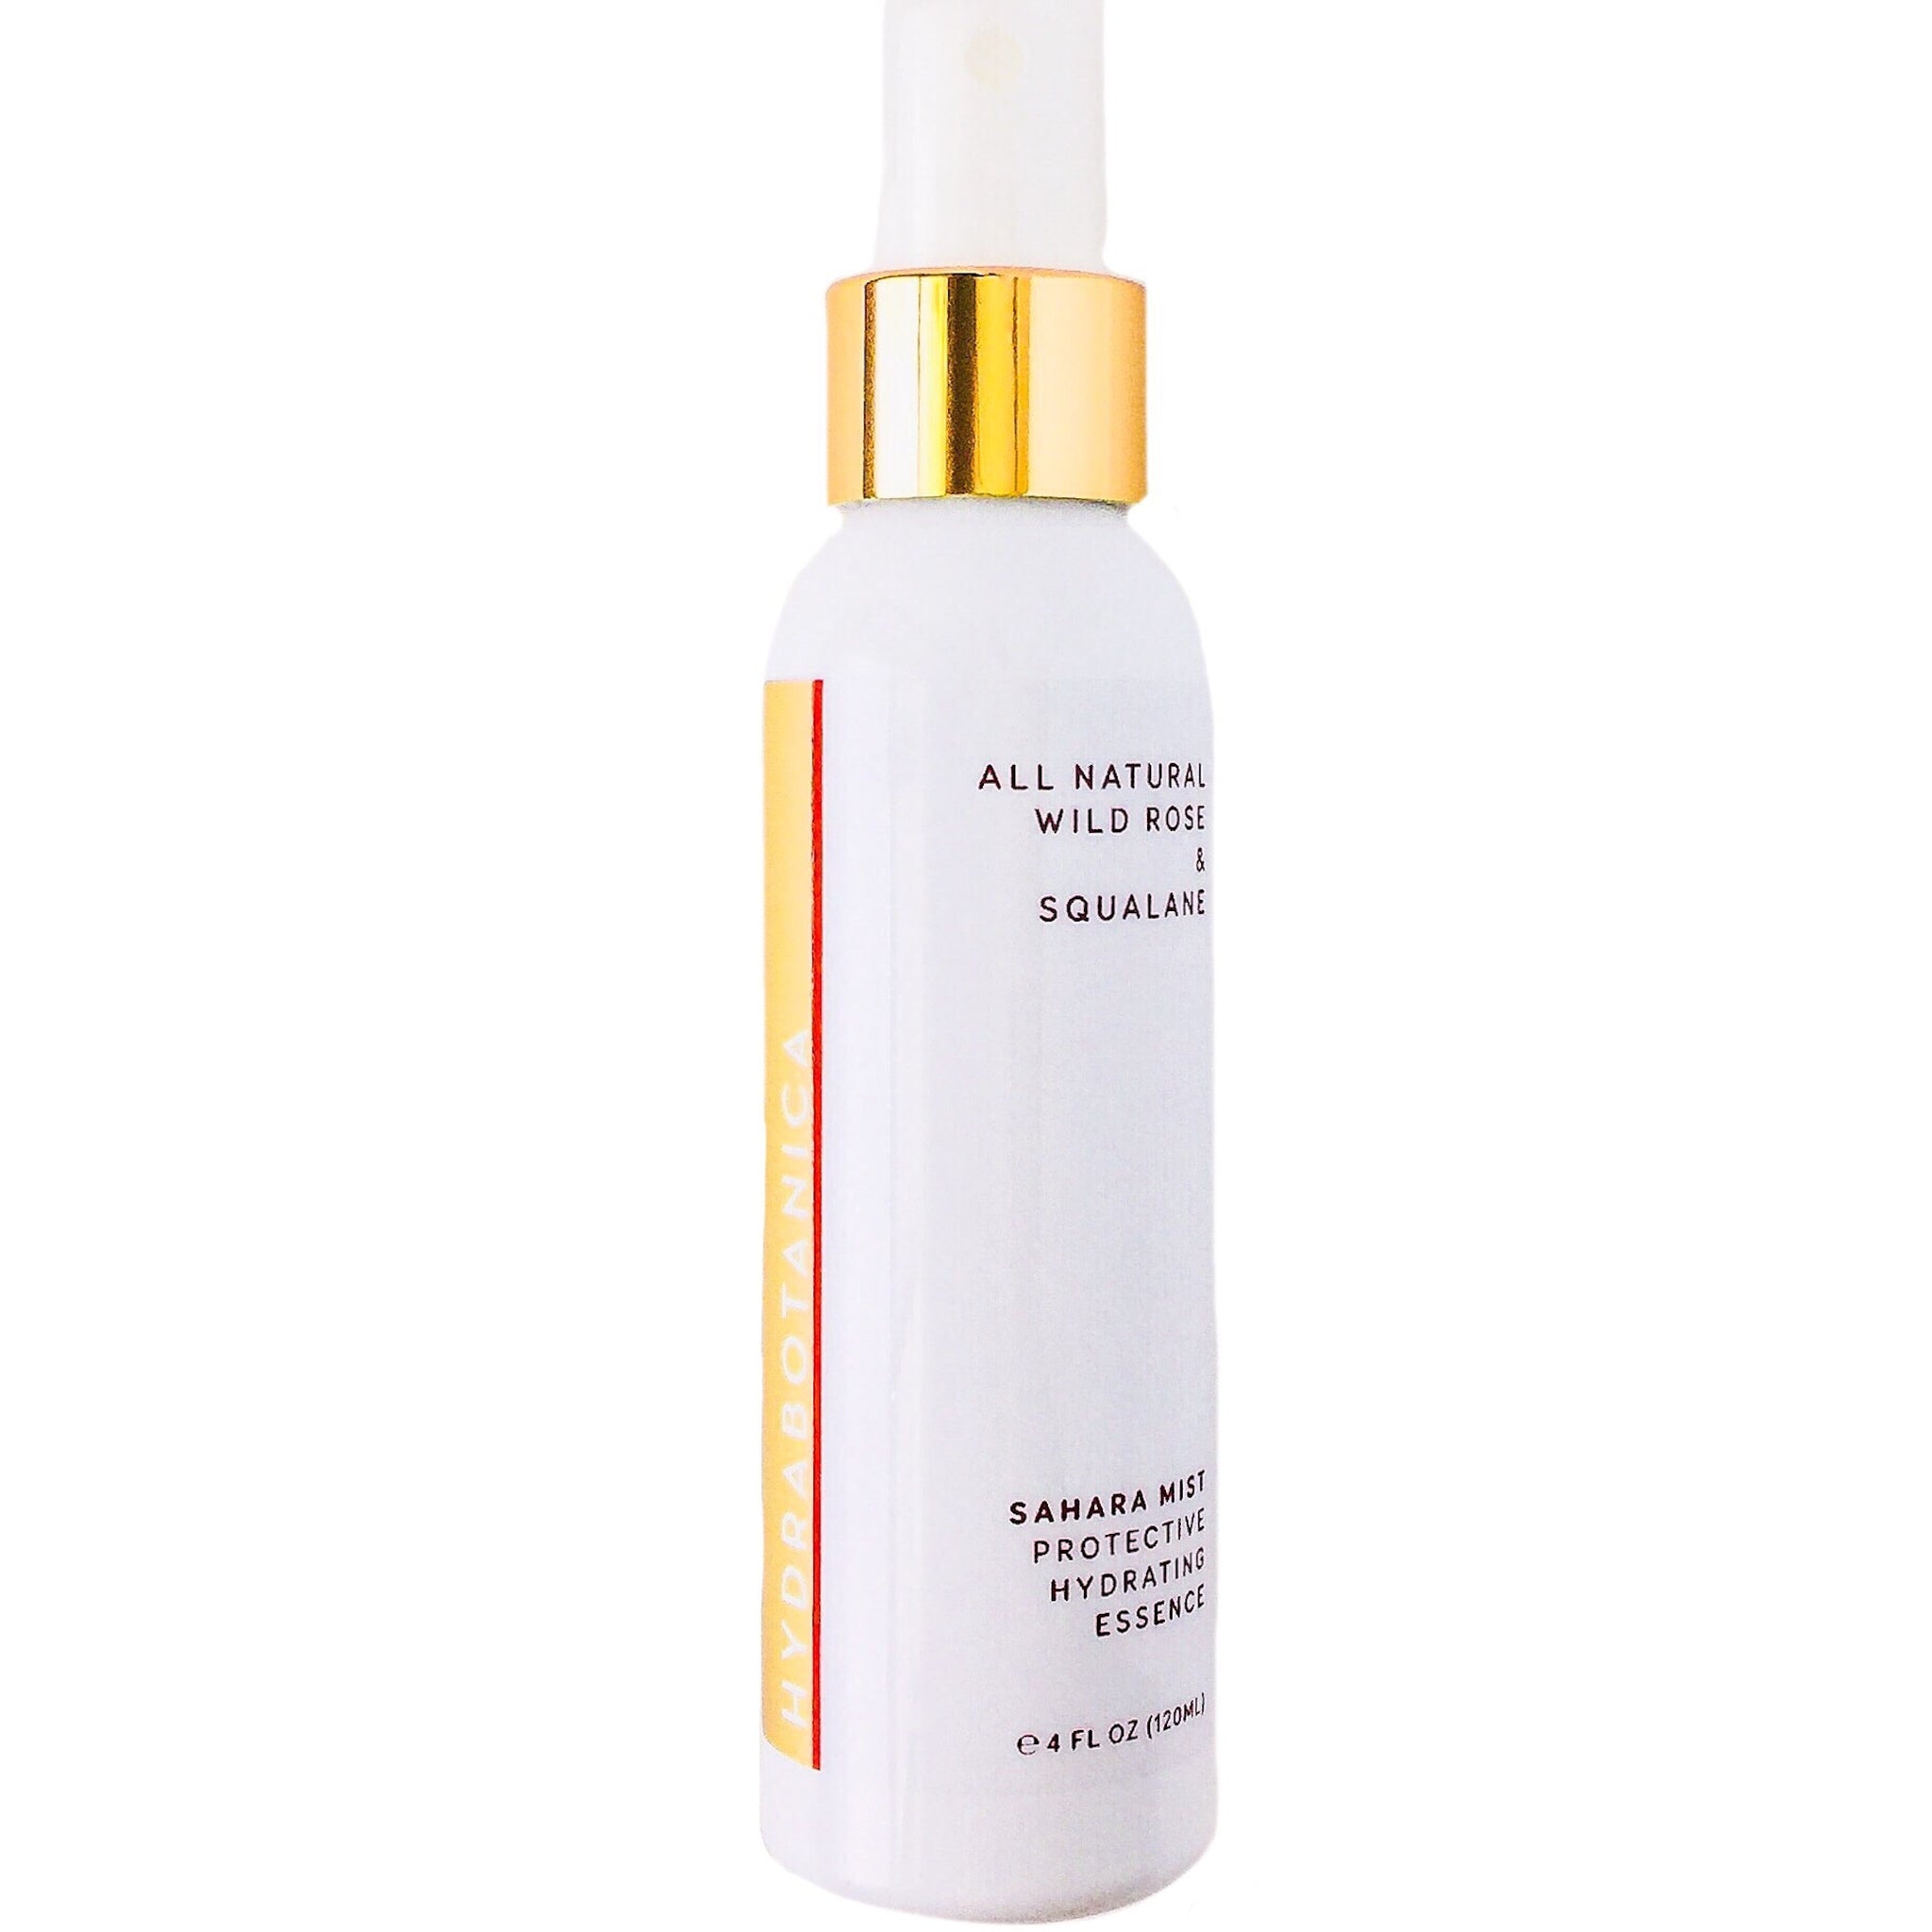 Pearlessence Rosewater Facial toner, enriched with rosewater and aloe